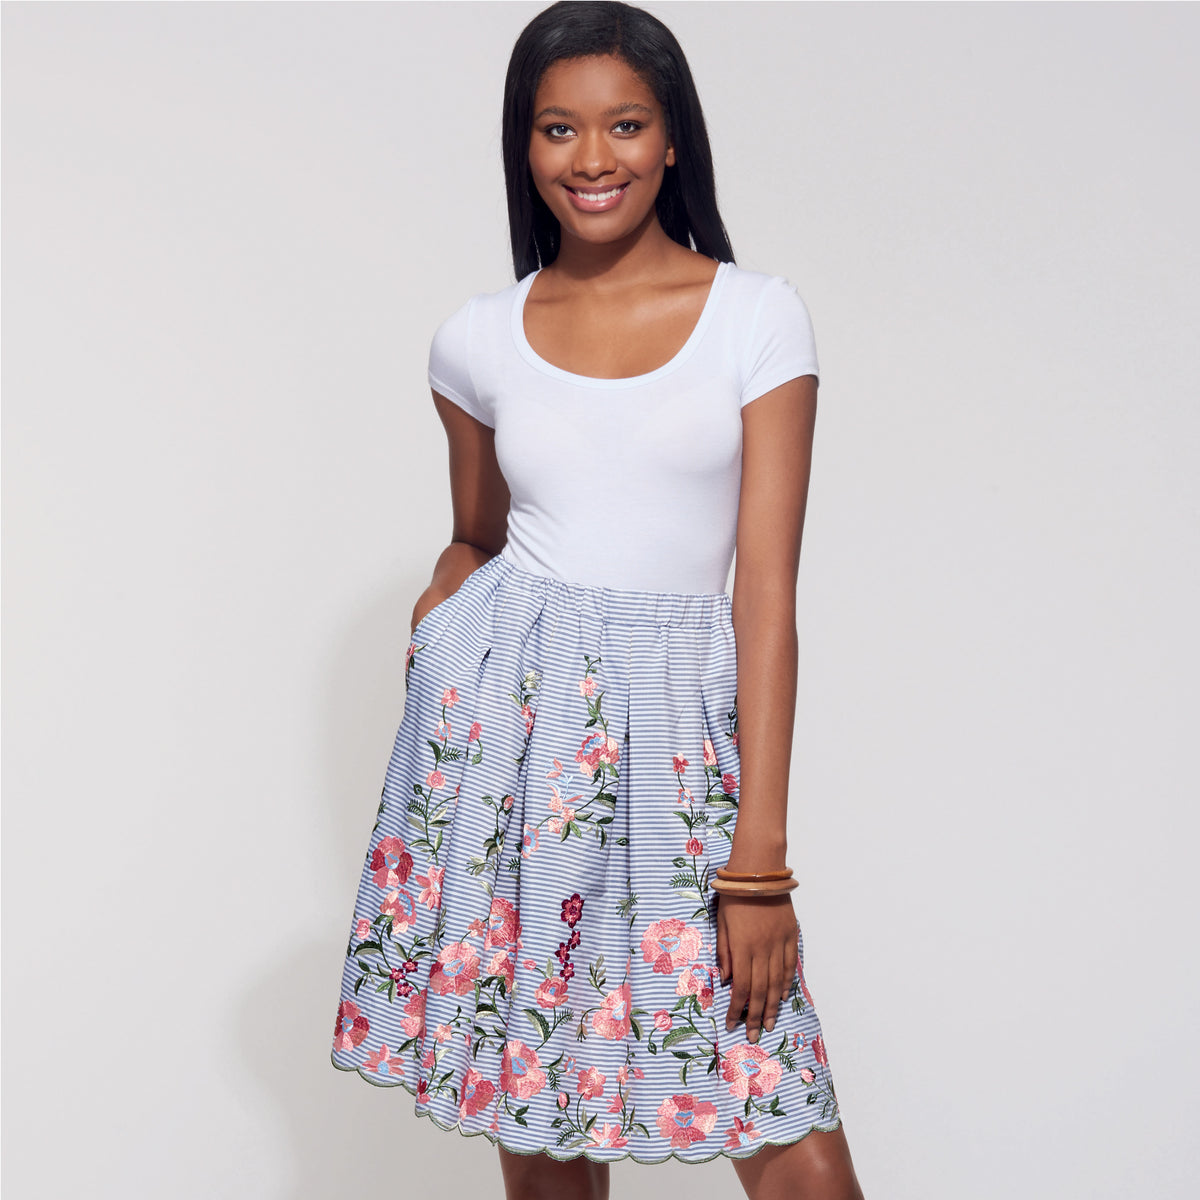 6605 New Look Sewing Pattern N6605 Misses' Skirt with Neck Tie